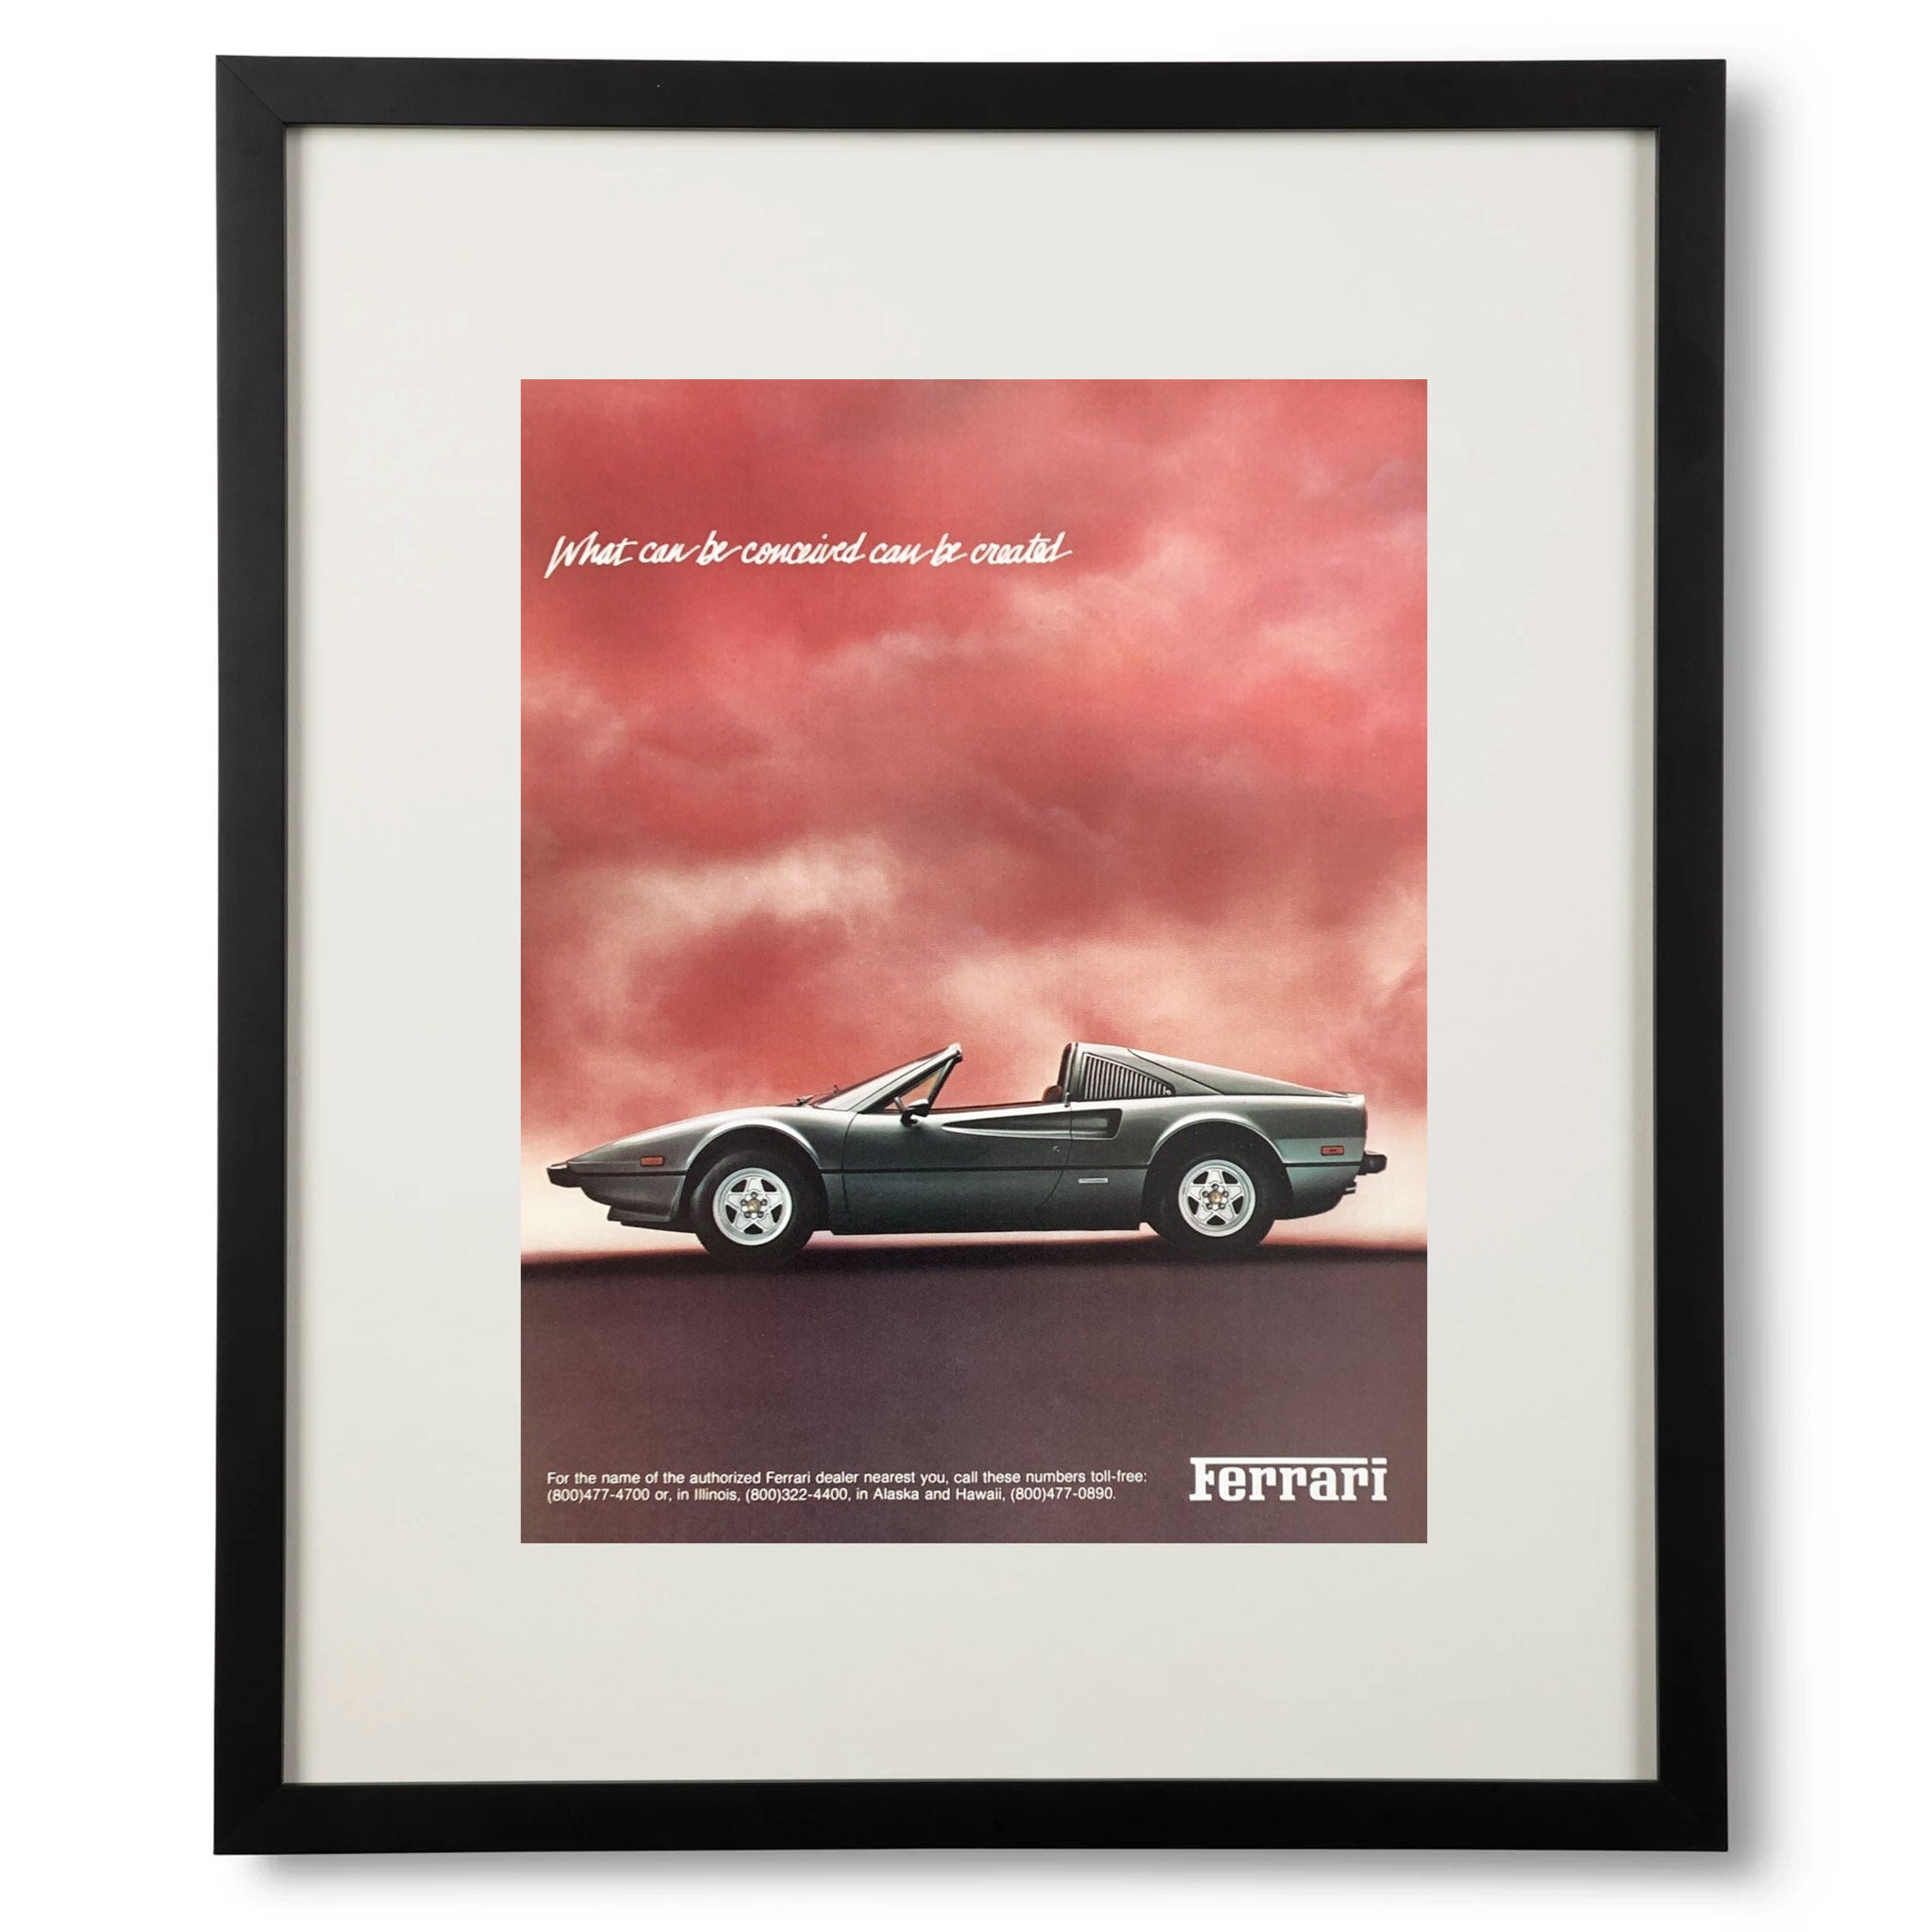 Framed Ferrari What Can Be Conceived Advertisement